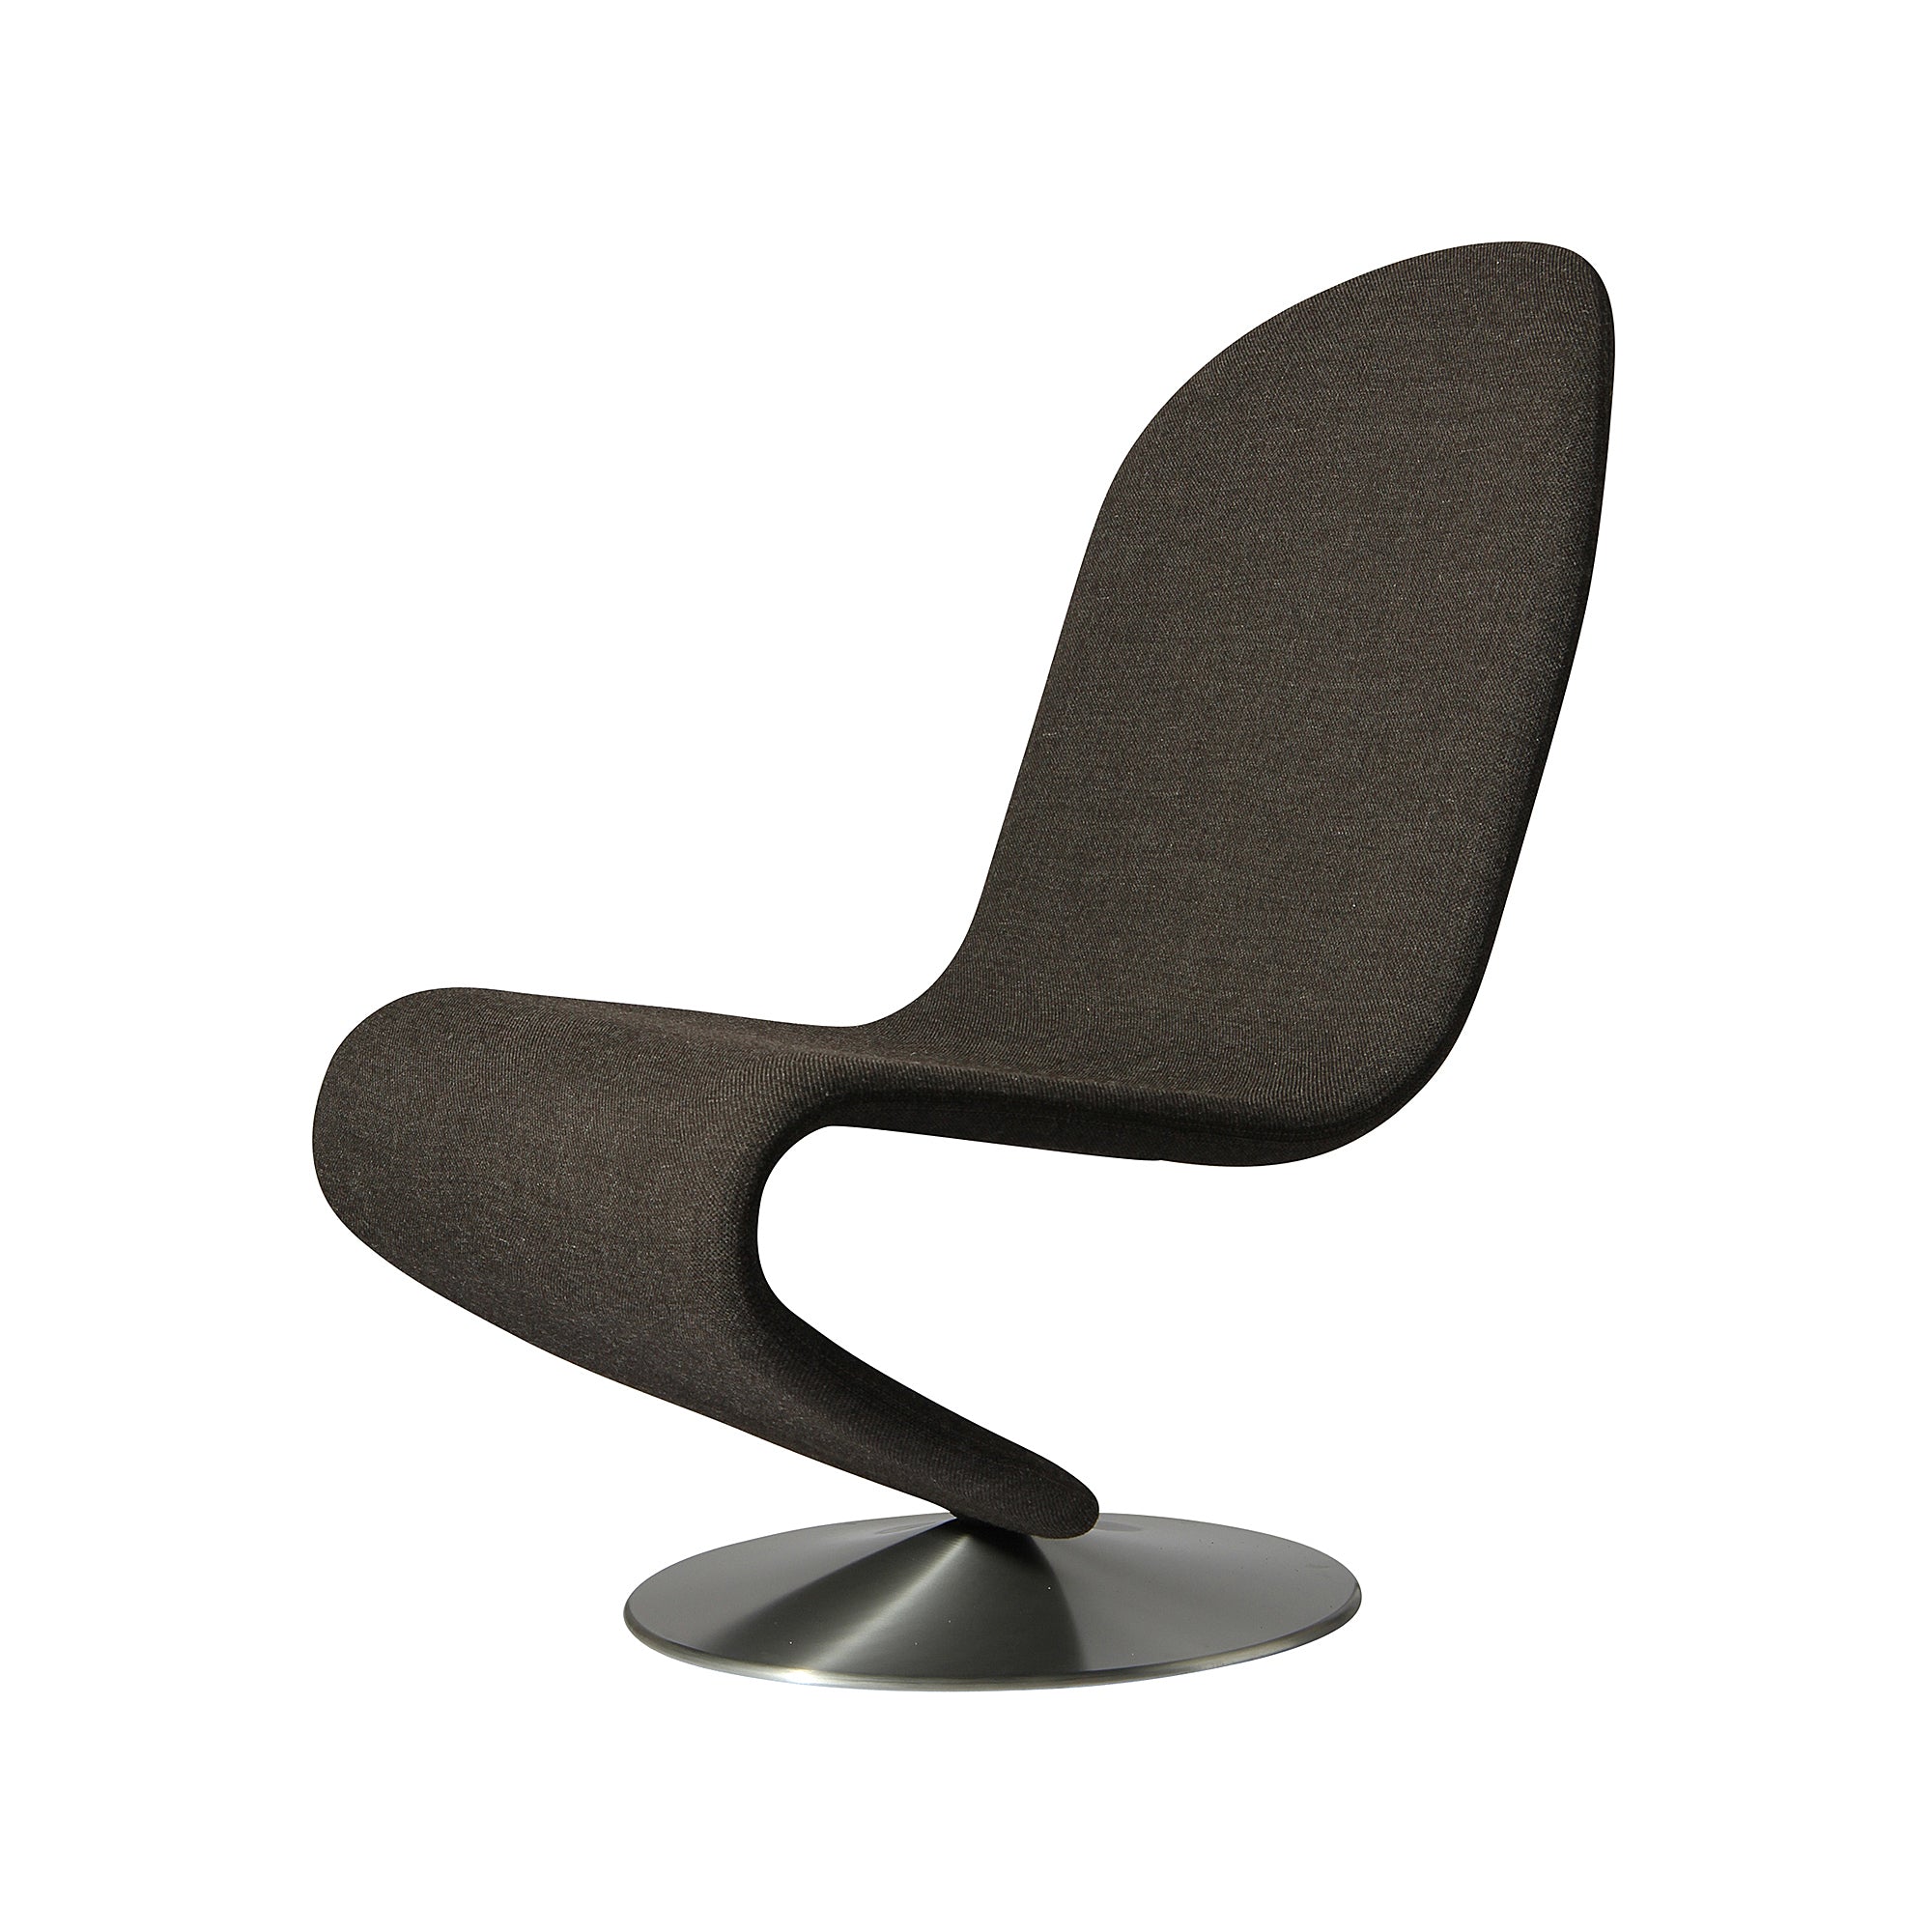 System 1-2-3 Lounge Chair